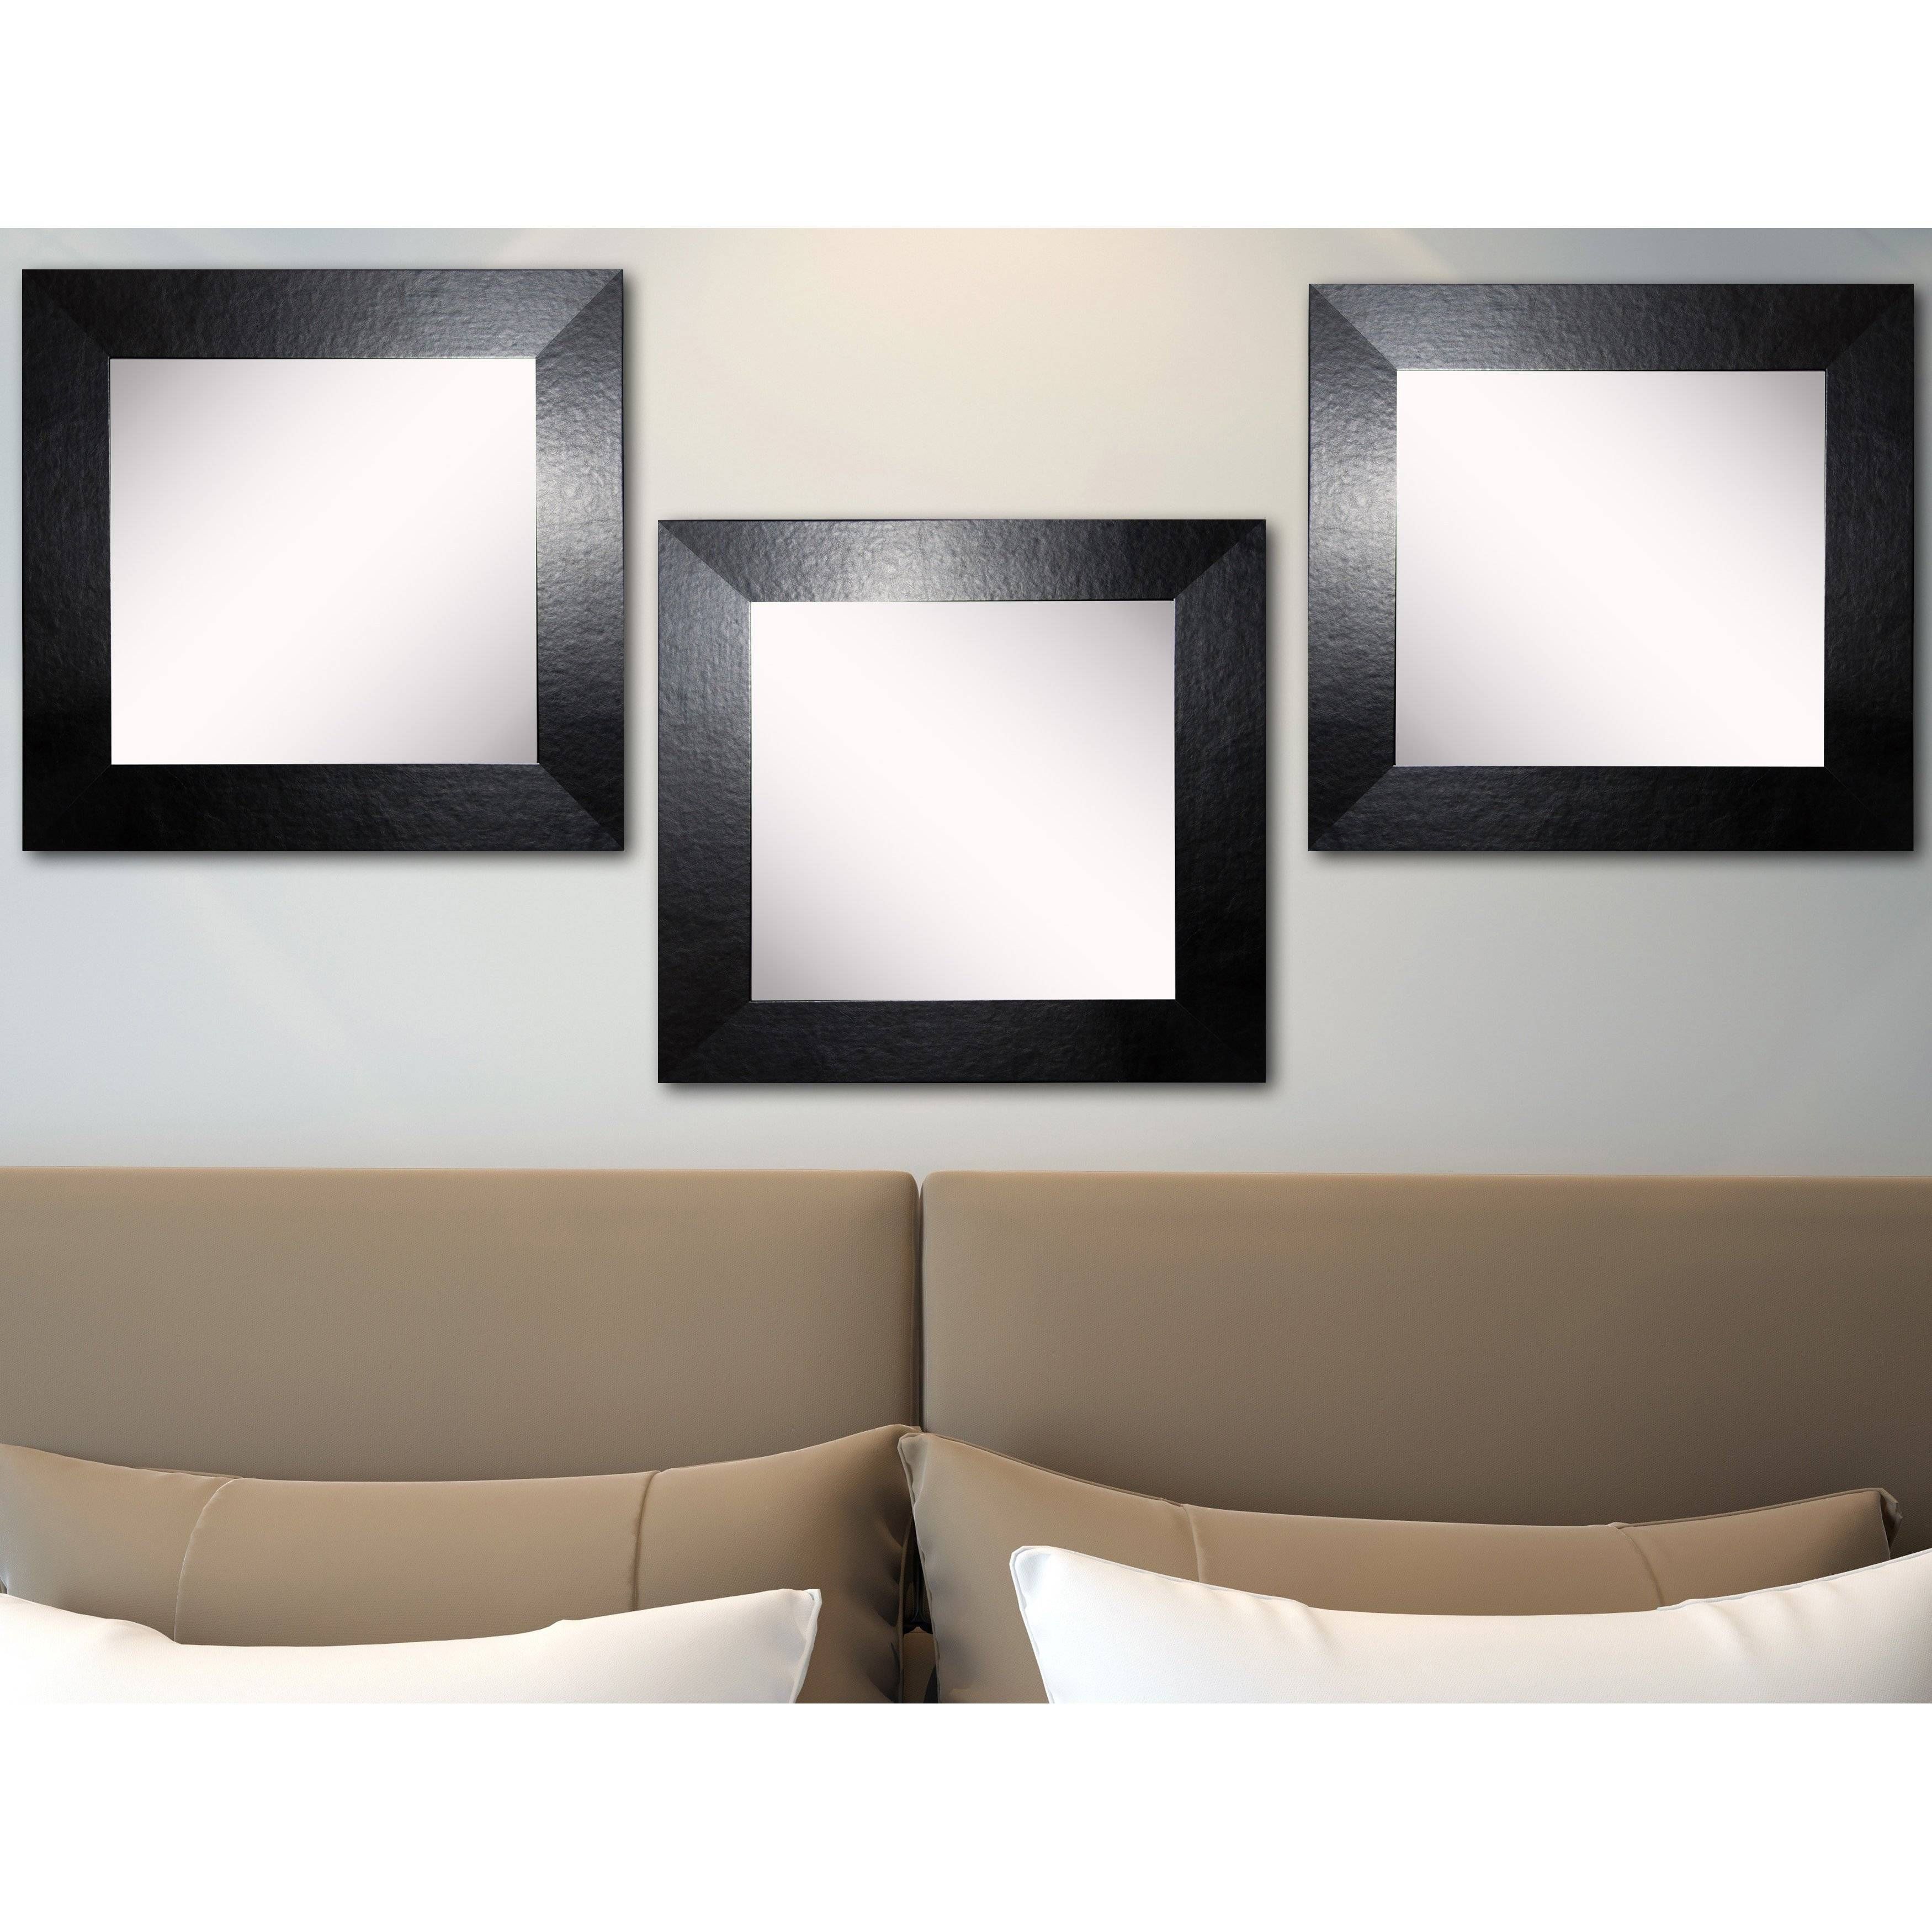 Rayne Mirrors Ava Black Wide Leather Wall Mirror | Wayfair Within Leather Wall Mirrors (View 7 of 25)